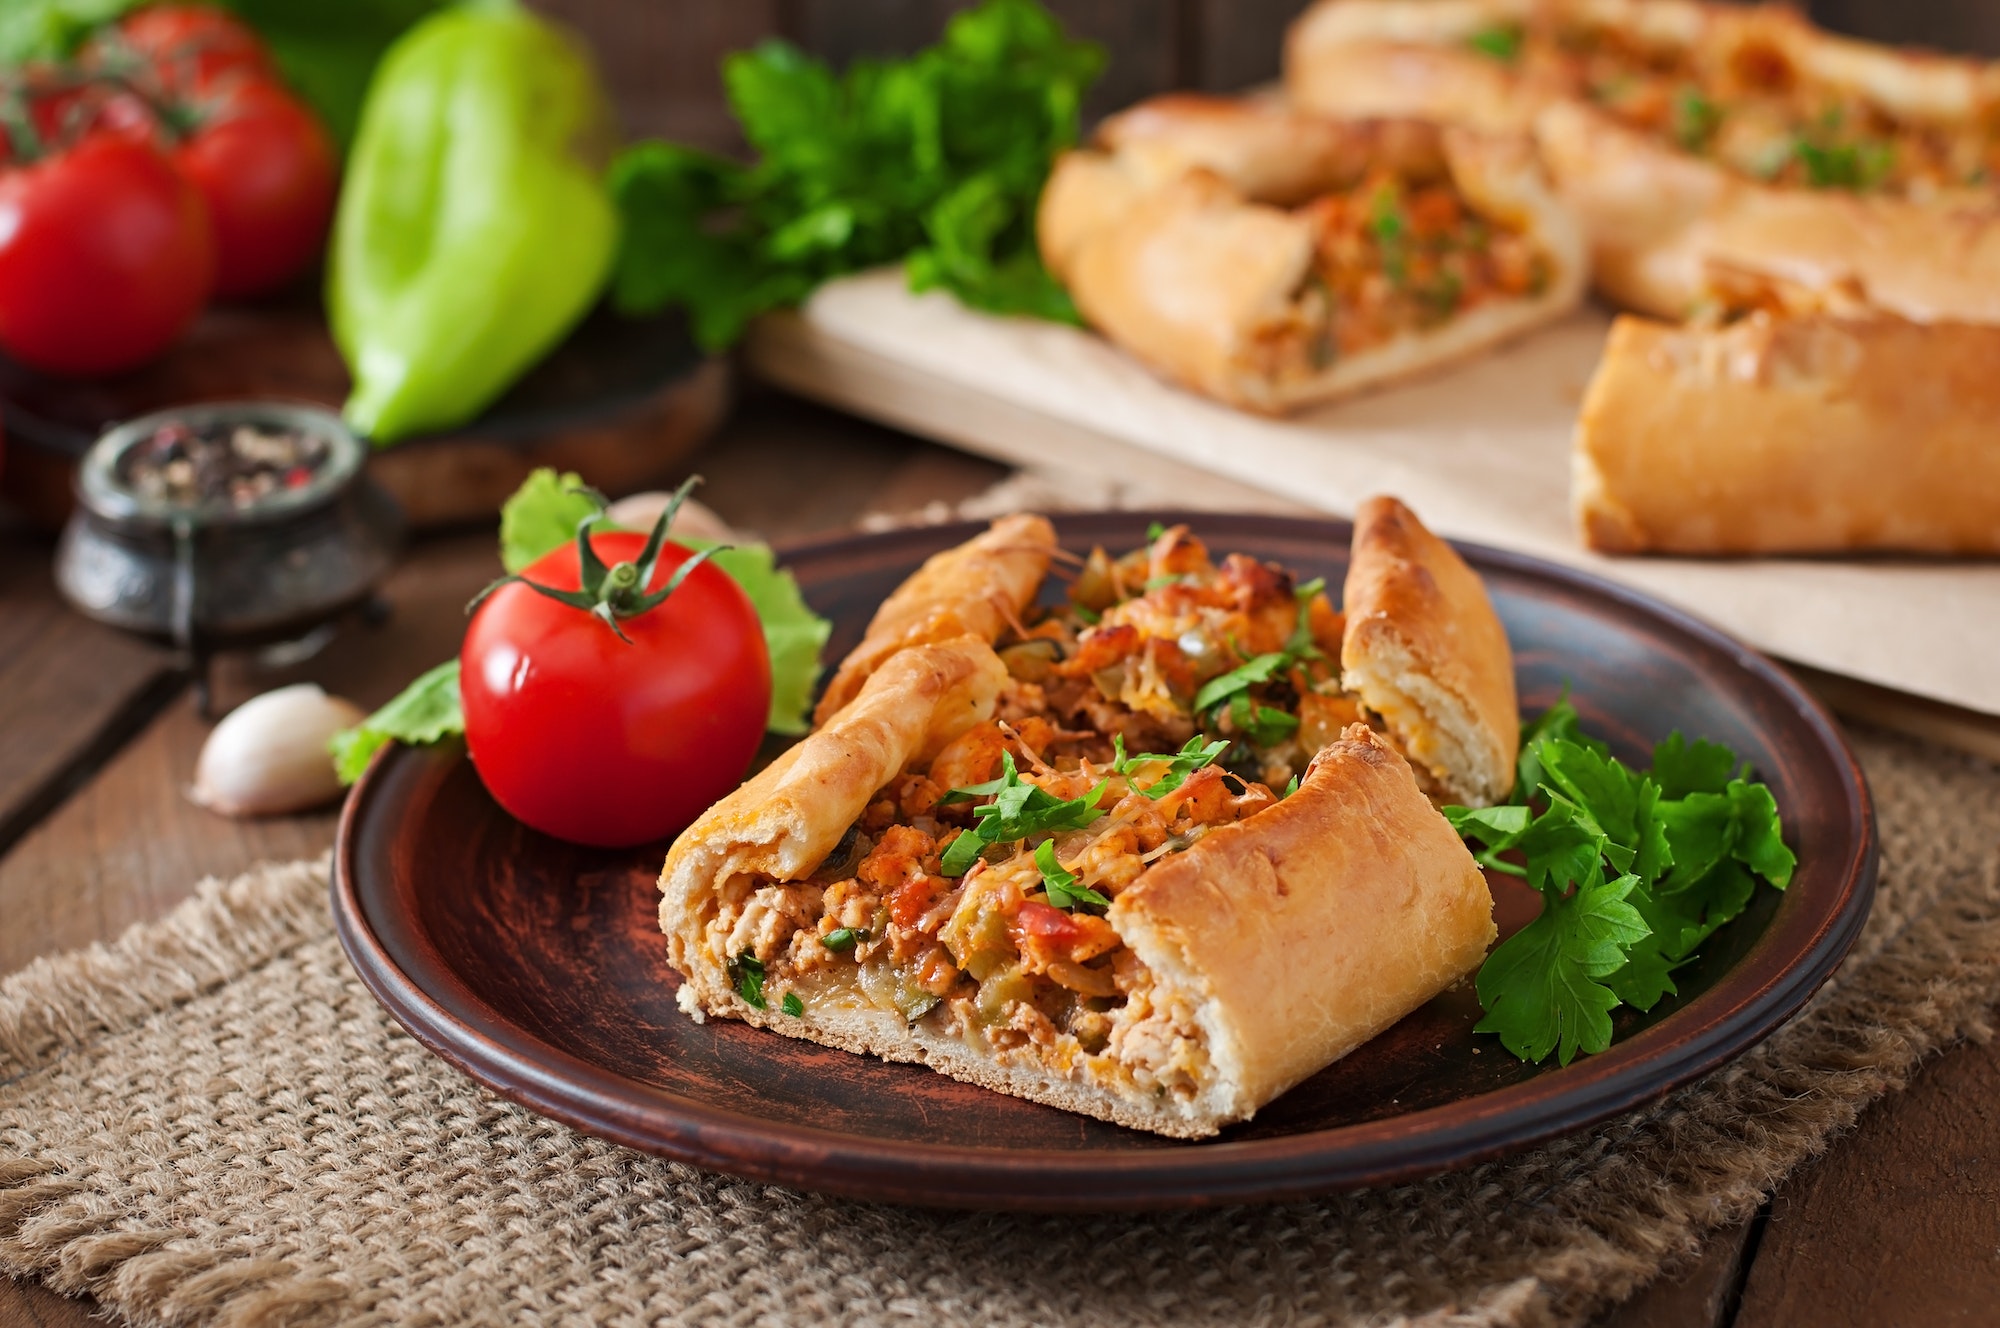 Turkish pide traditional food with beef and vegetables